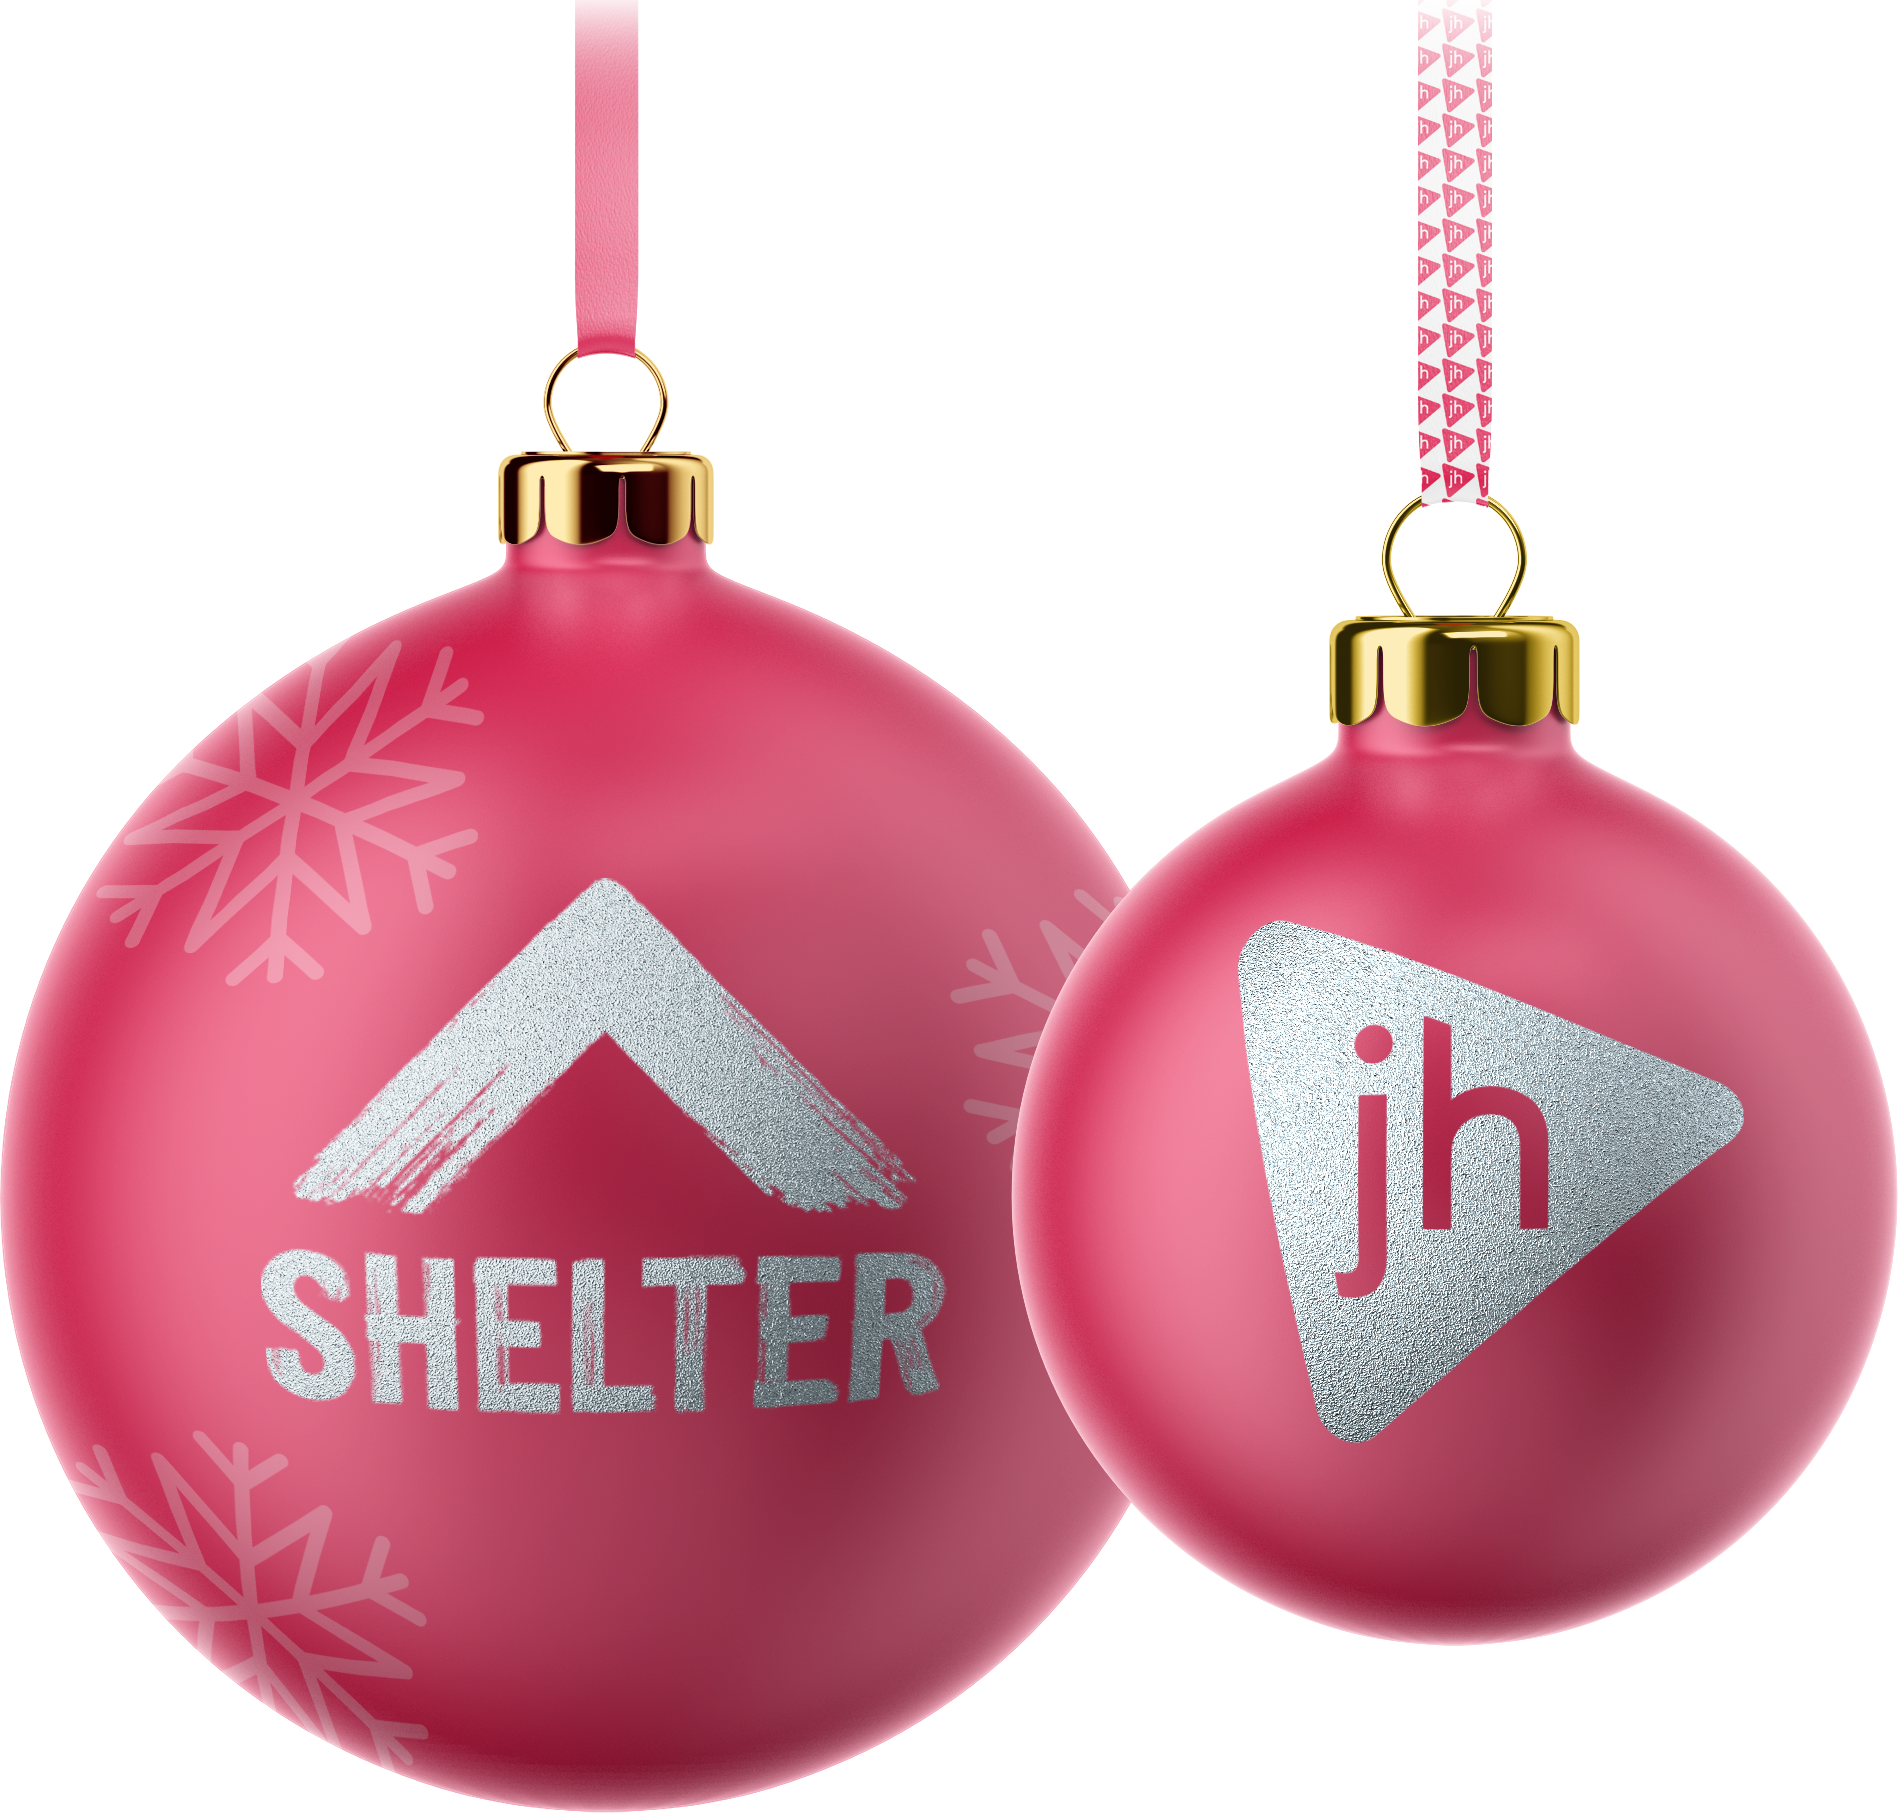 Step into Christmas with a Purpose - JH's Sock Baubles for Shelter